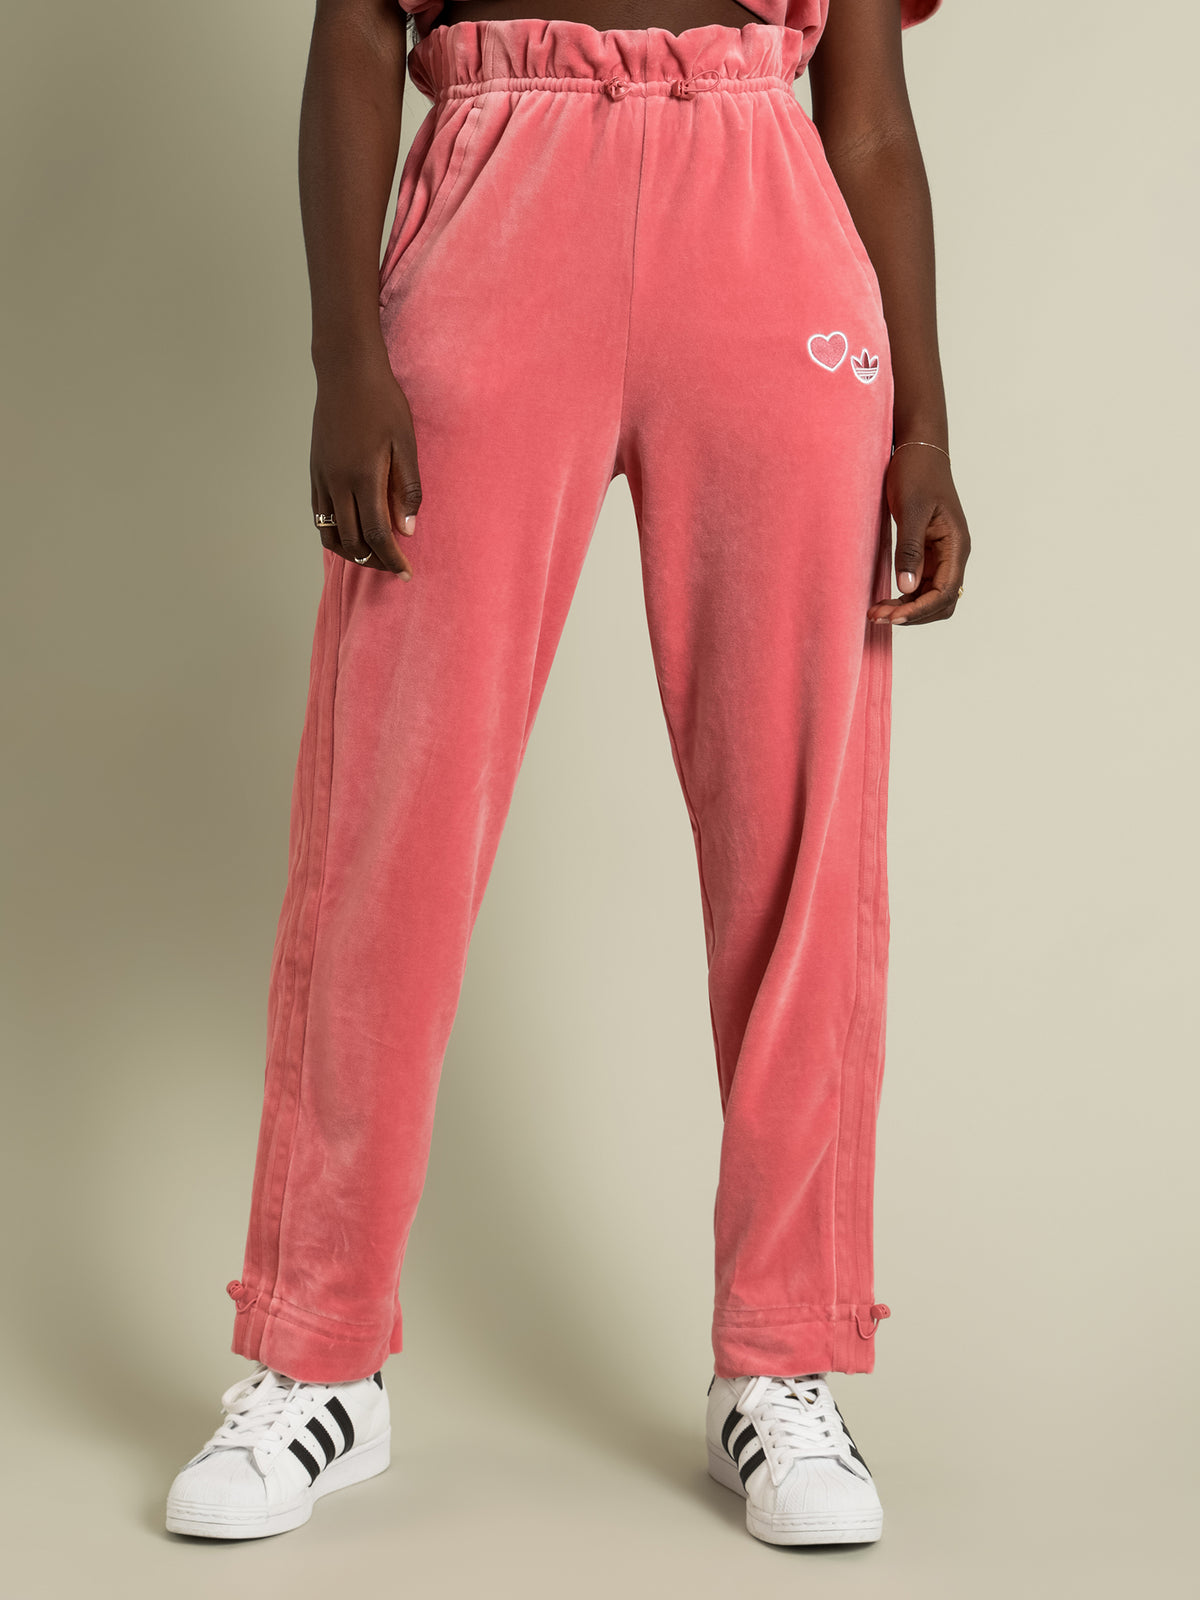 Love Heart Velour Track Pants in Hazy Rose Pink